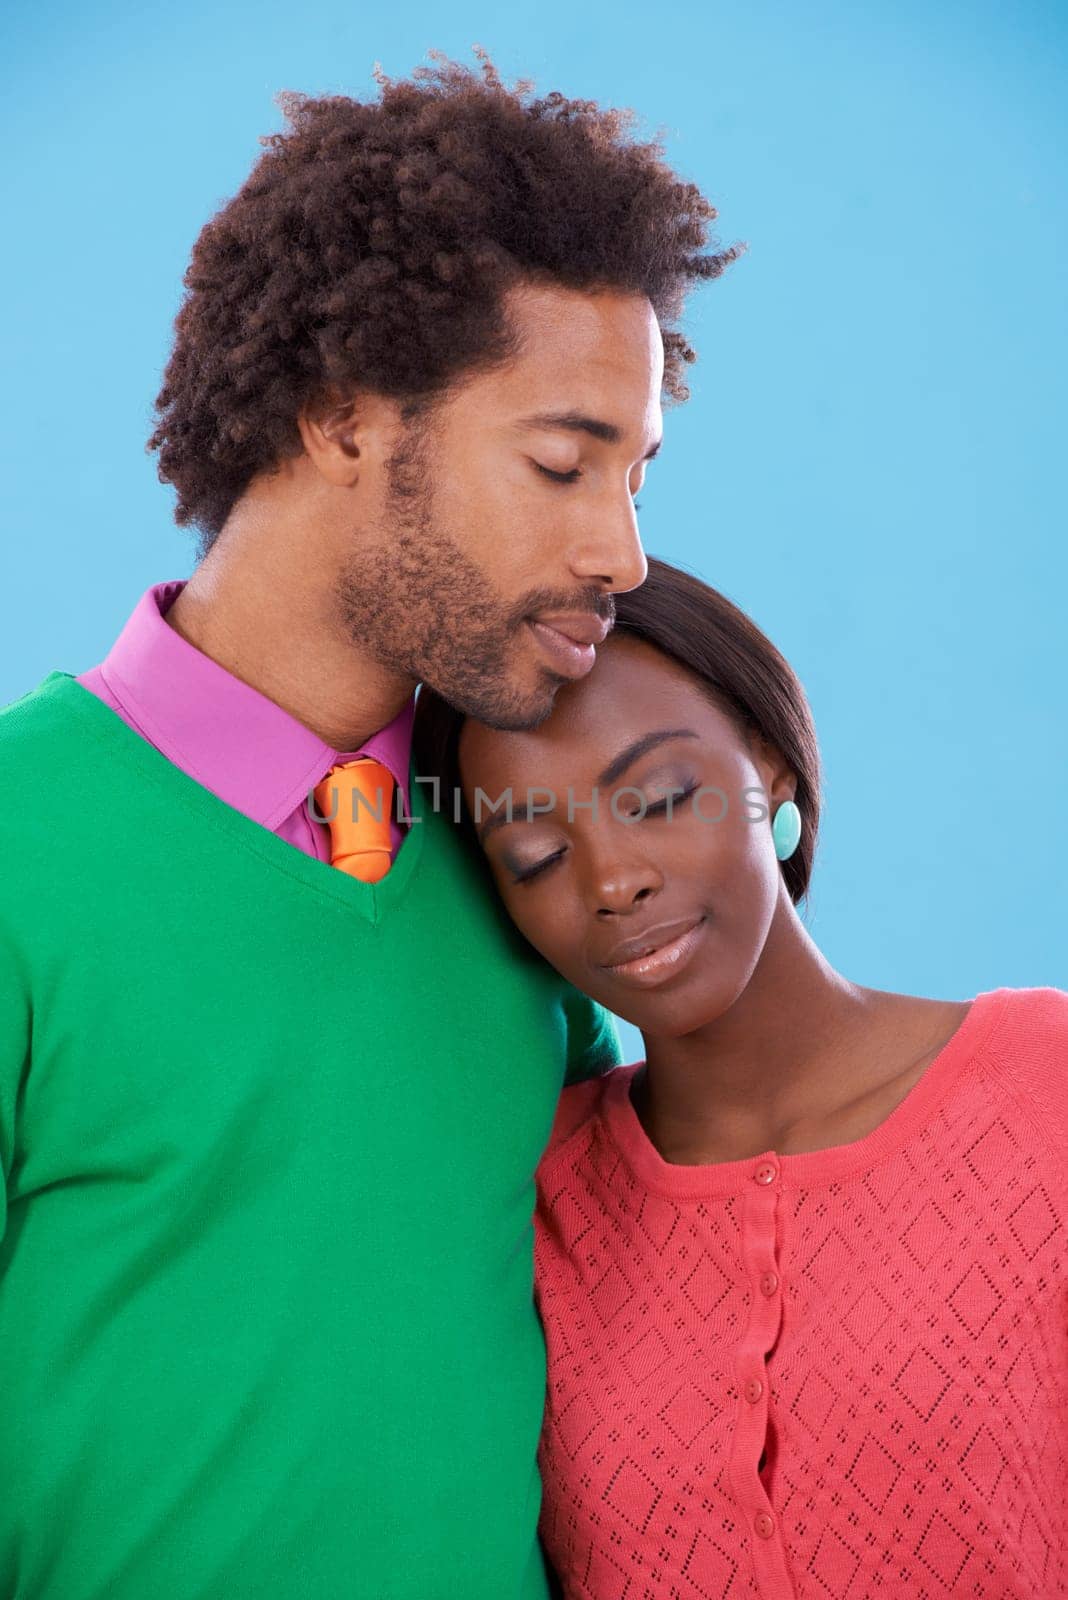 Hug, love and black couple with marriage, happy and romance on a blue studio background. Relationship, embrace and man with woman and peace with fashion and bonding together with a date and care.